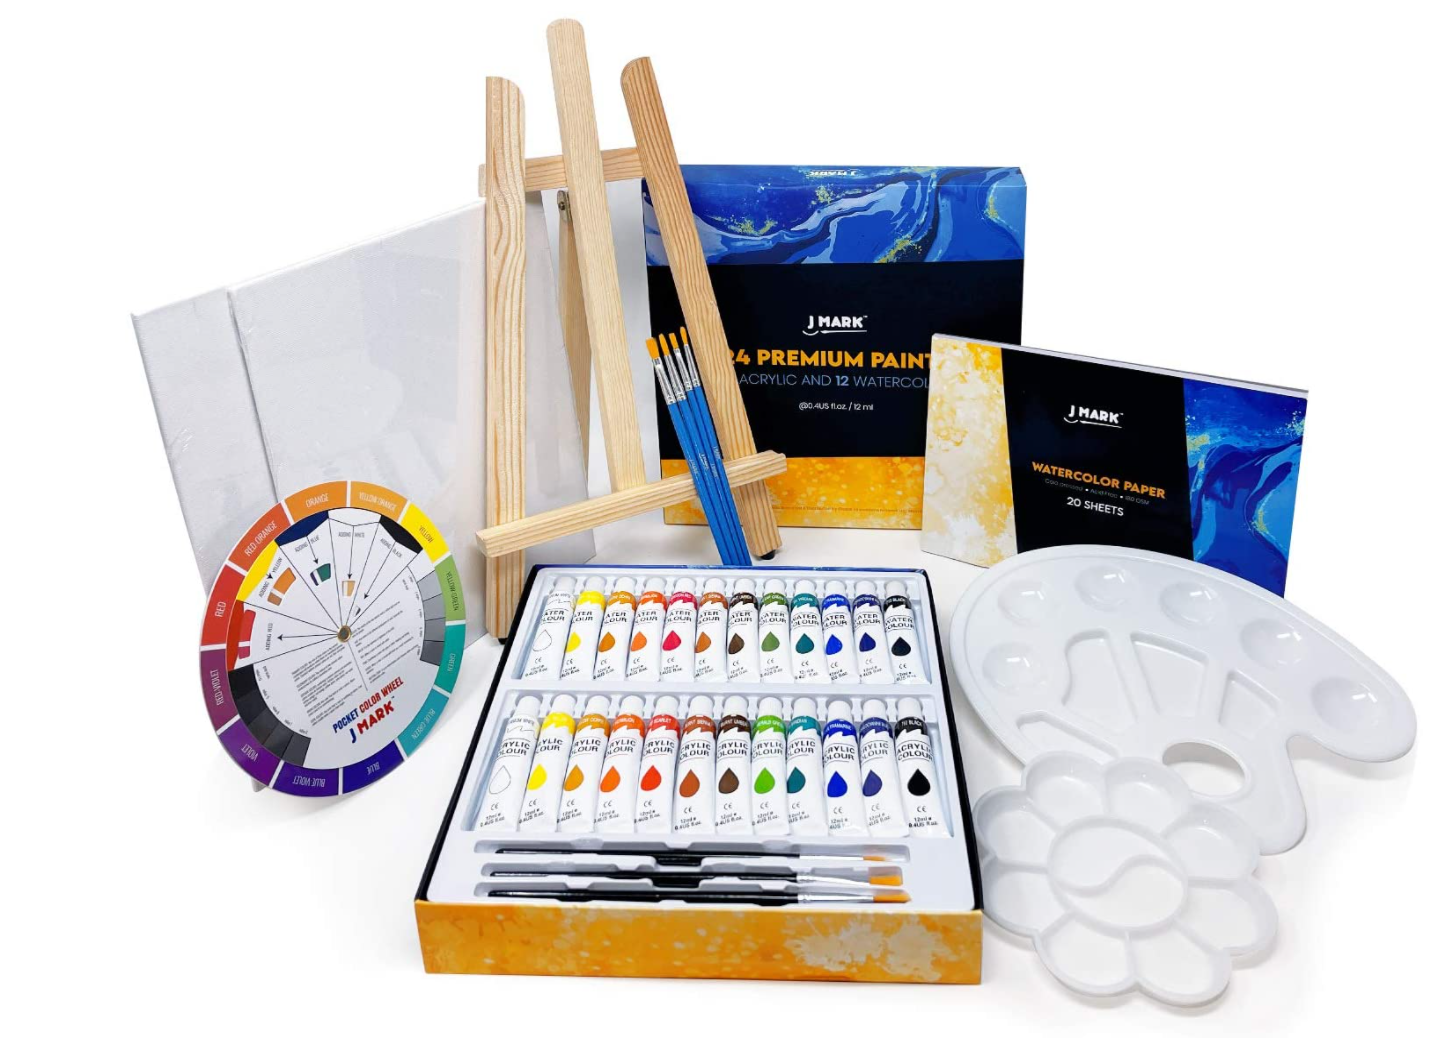 Acrylic and Watercolor Paint Set Supplies 40-Piece Art Canvas Painting Kit  for Adults Includes Wood Easel 2 Canvases 8x10 inch, 24 Non-Toxic Washable